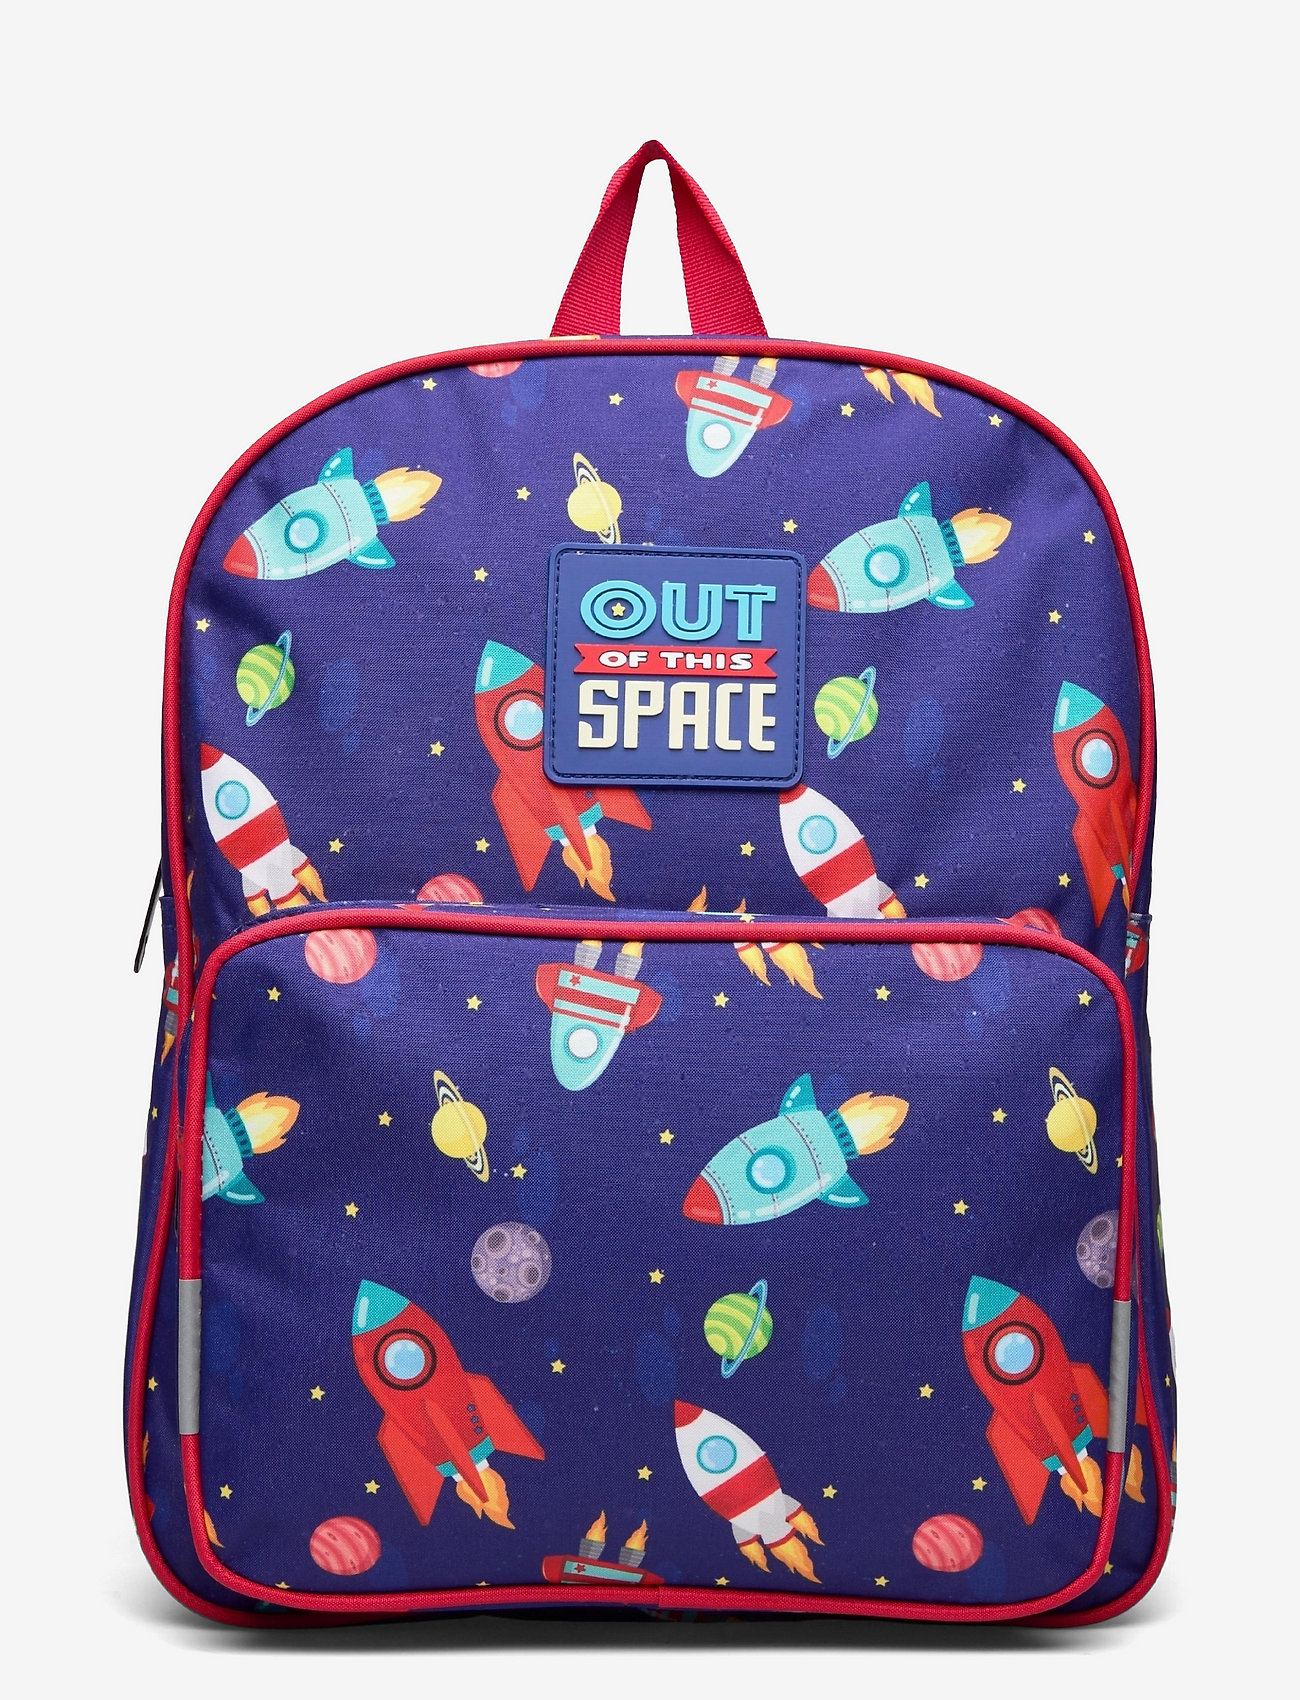 Euromic Out Of Space Medium Backpack - Bags | Boozt.com